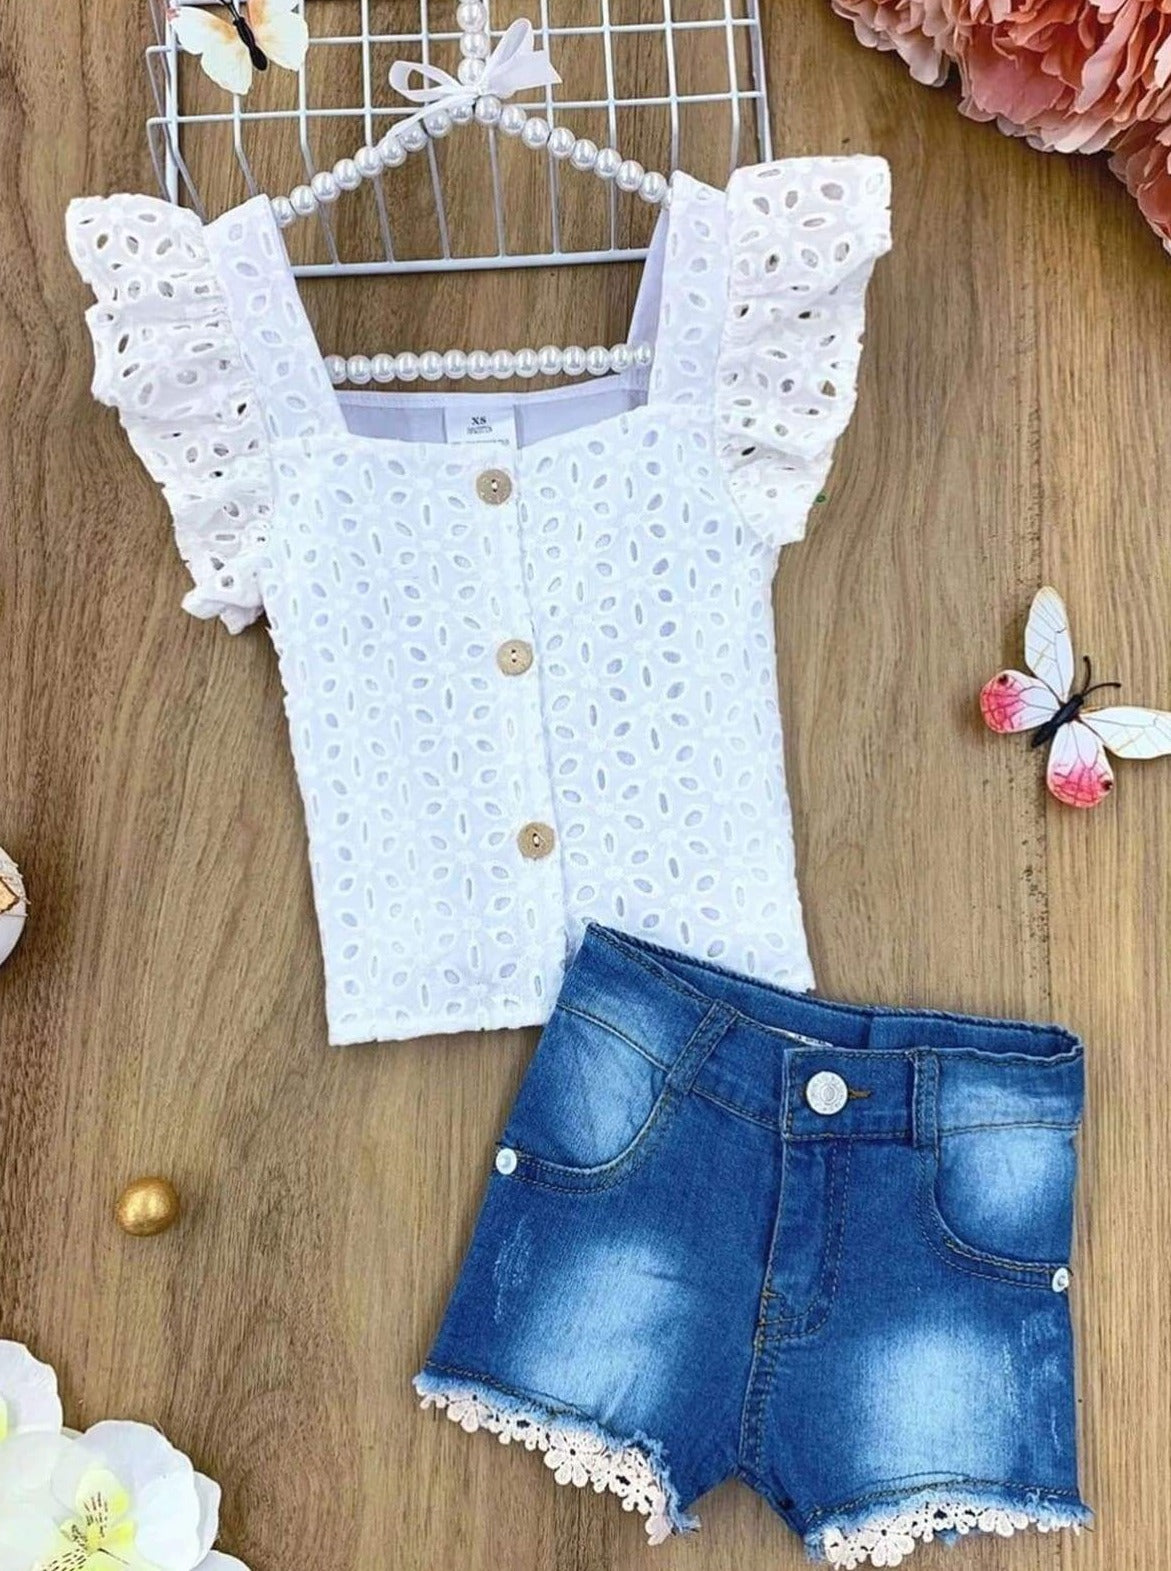 features a lace flutter sleeve button-down top  and denim shorts with a crochet flower hem